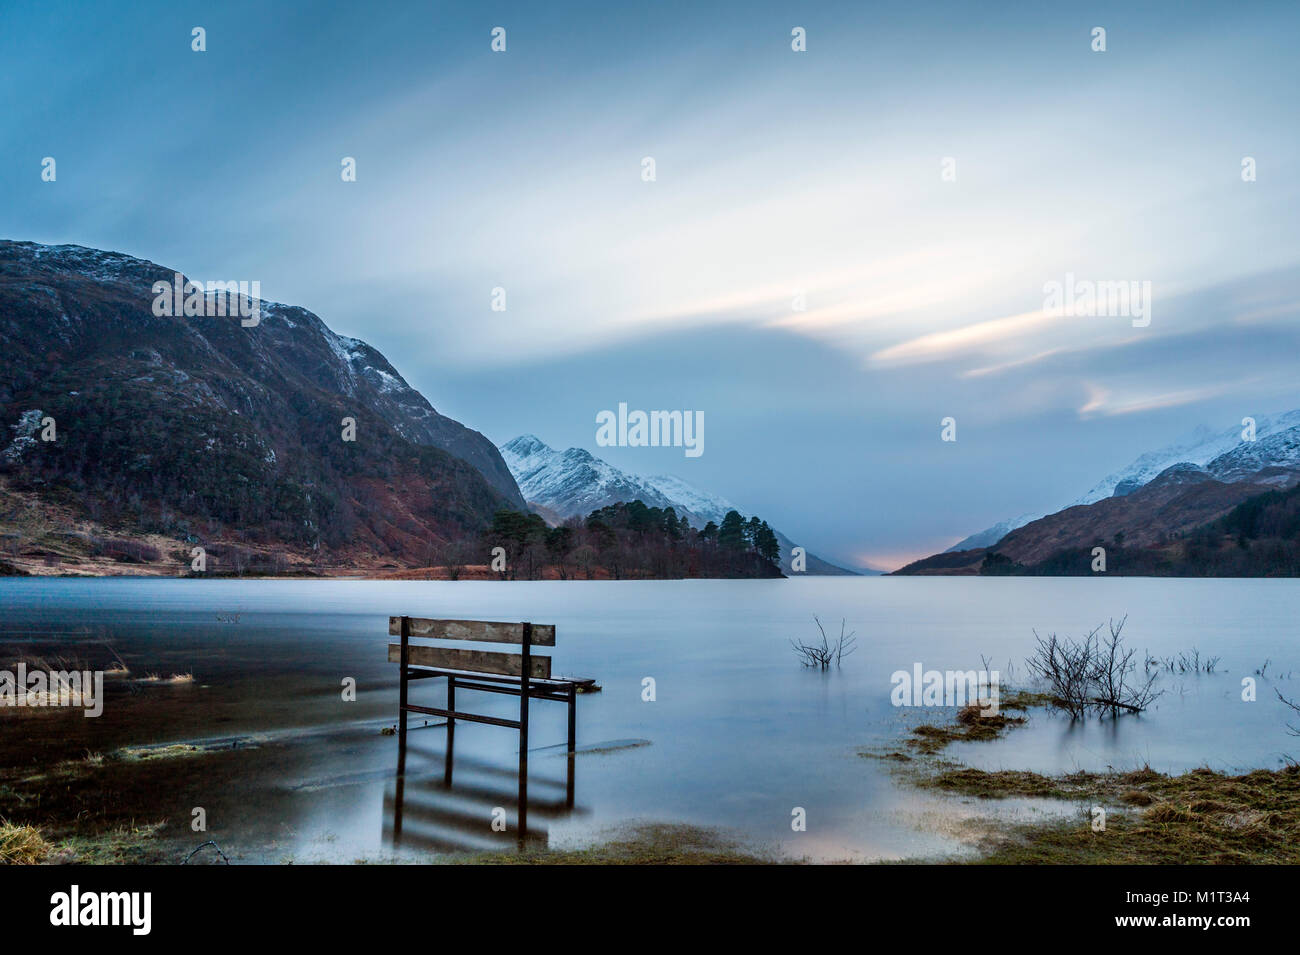 The water levels at Glenfinnan Bay, on Loch Shiel, are much higher than usual, and this bench has become waterlogged. Stock Photo